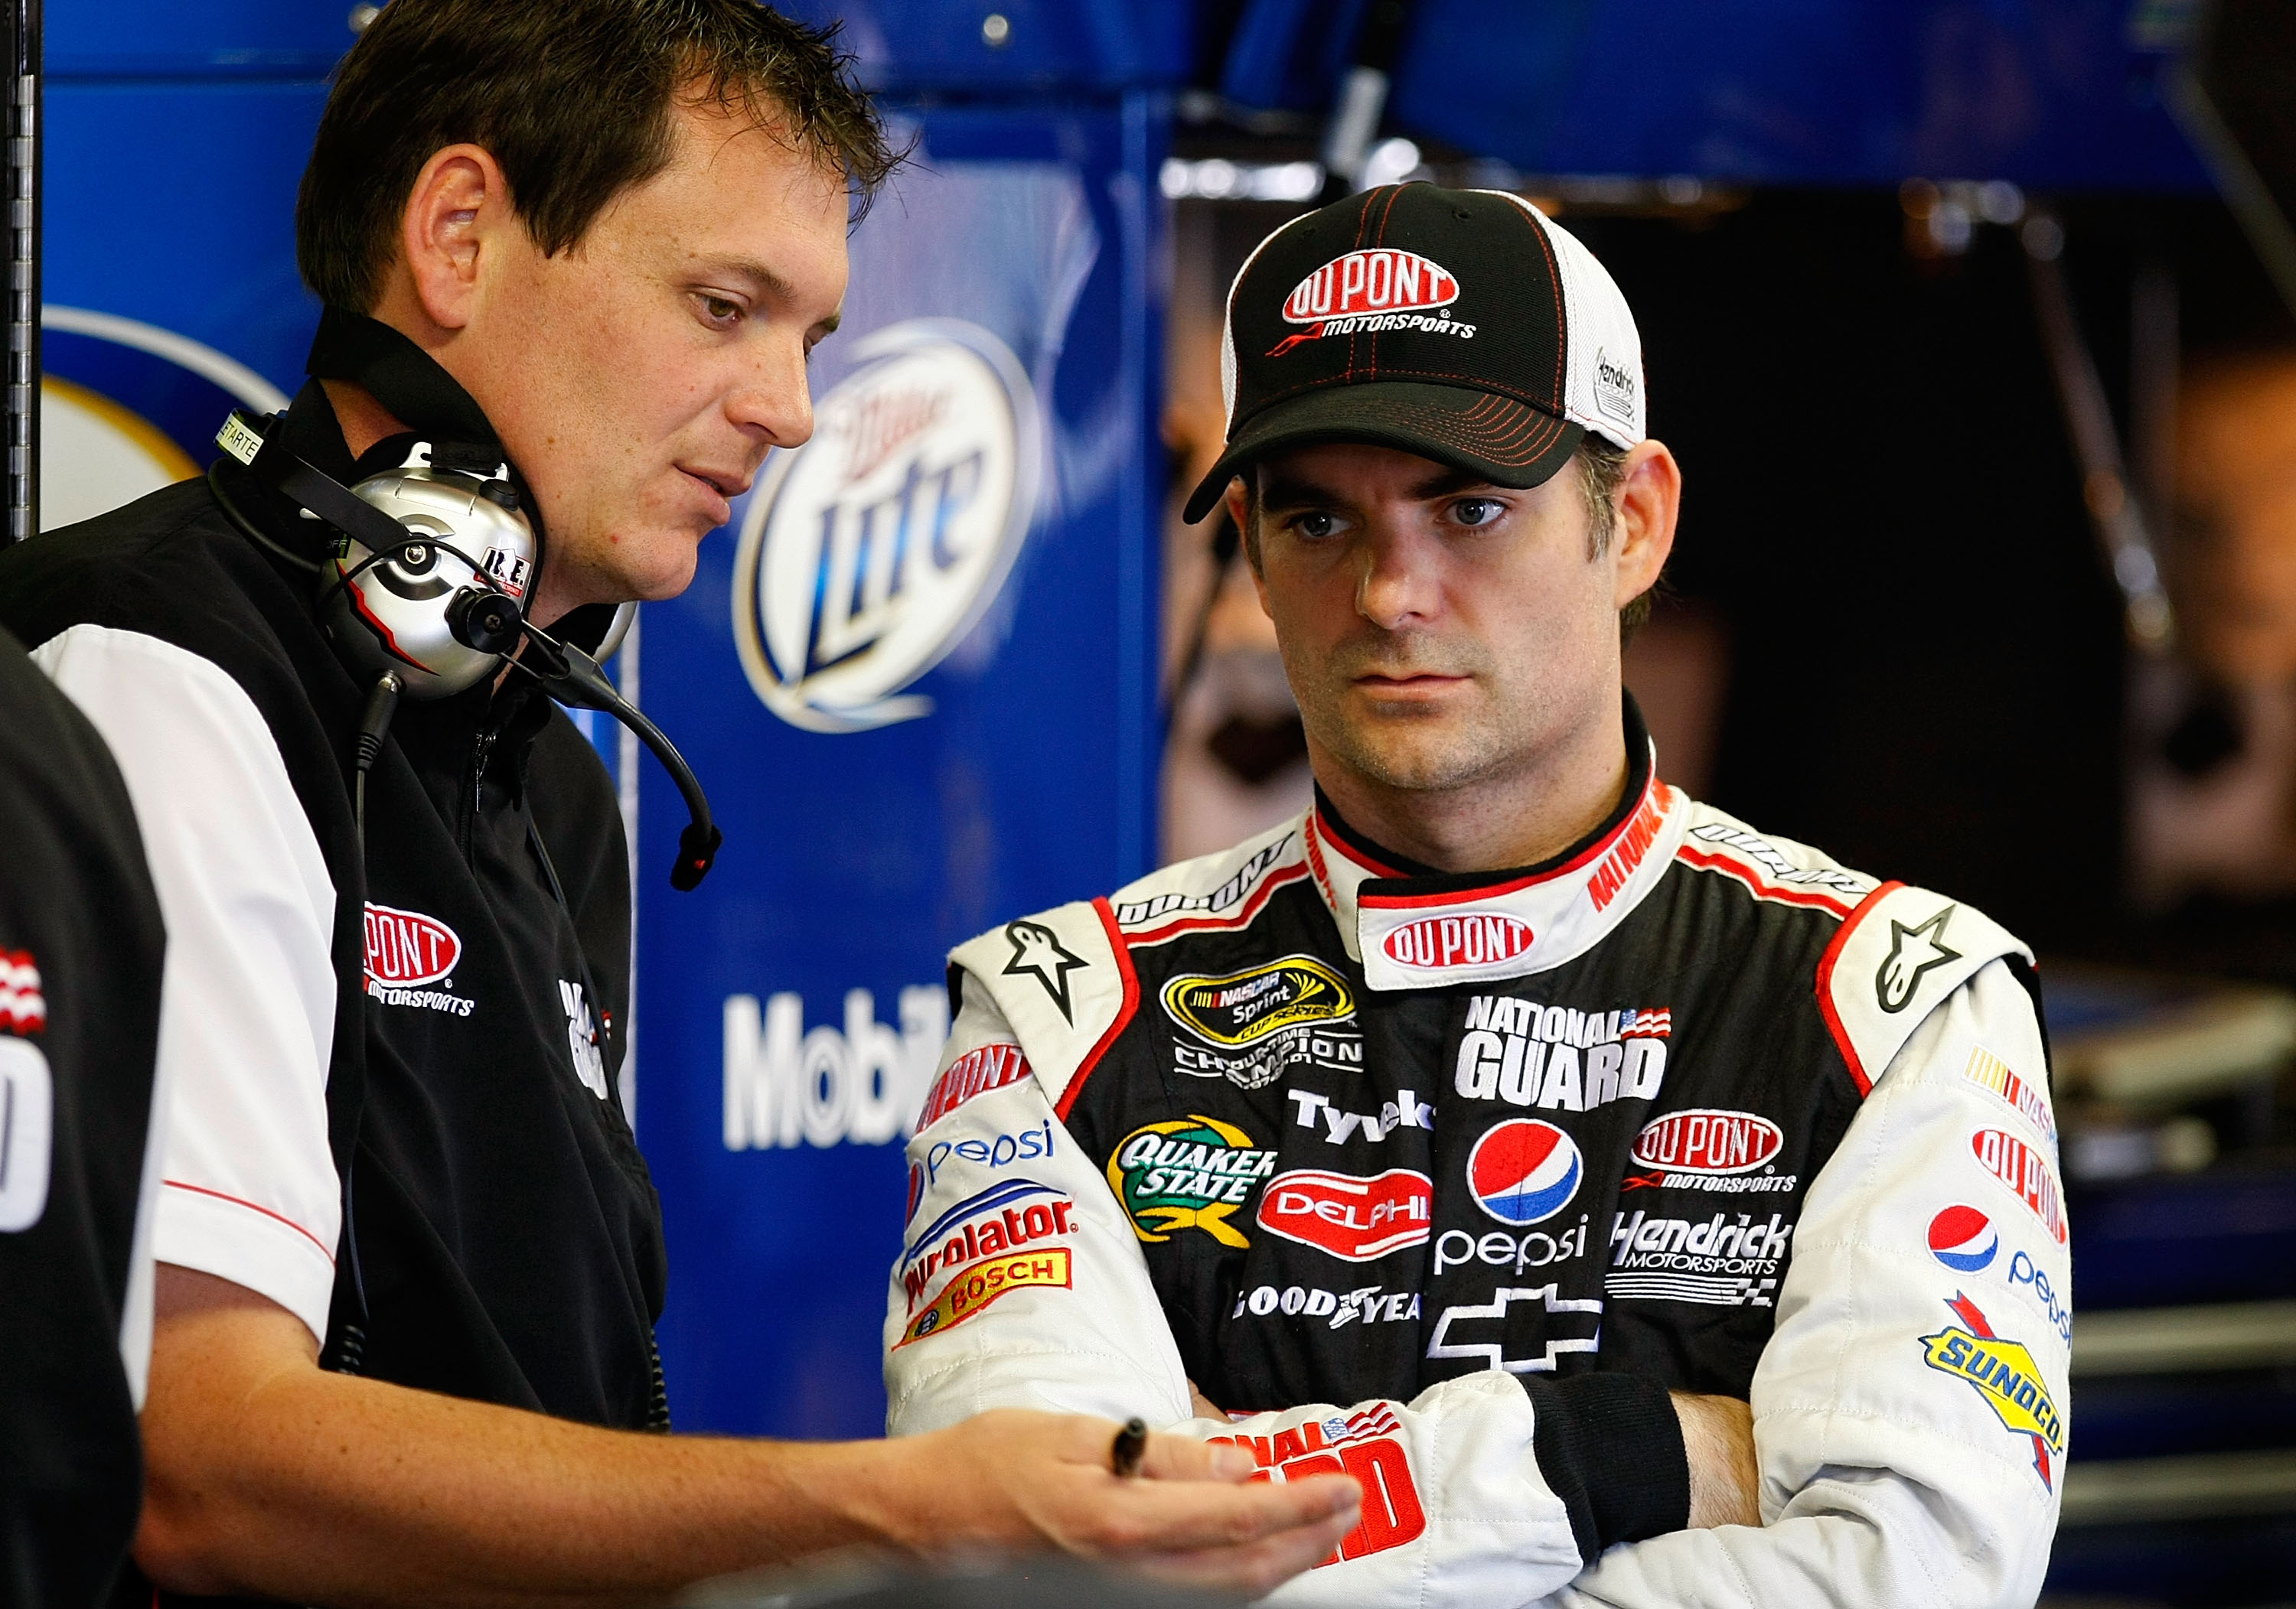 BROOKLYN, MI - JUNE 12: Jeff Gordon (R), driver of the #24 DuPont/National Guard Job Skills Chevrolet, talks with crew chief Steve Letarte (L) in the garage during practice for the NASCAR Sprint Cup Series Heluva Good! Sour Cream Dips 400 at Michigan Inte